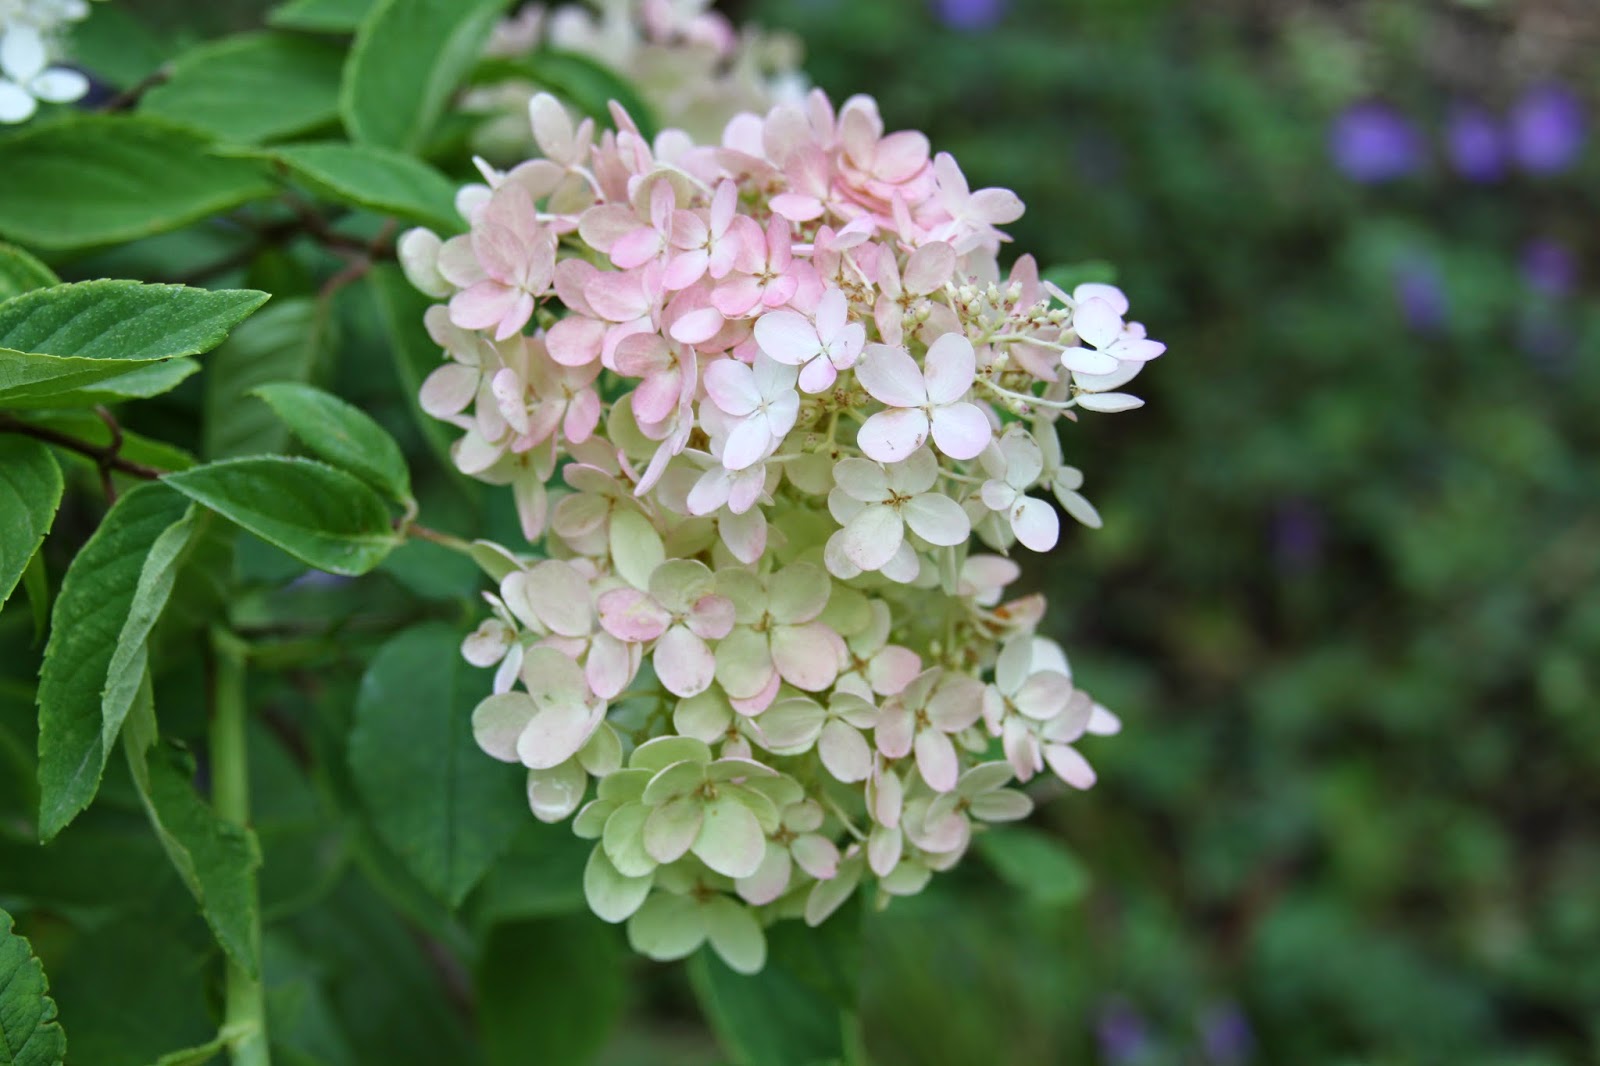 hydrangea paniculata hydrangeas are quite lovely this time of year